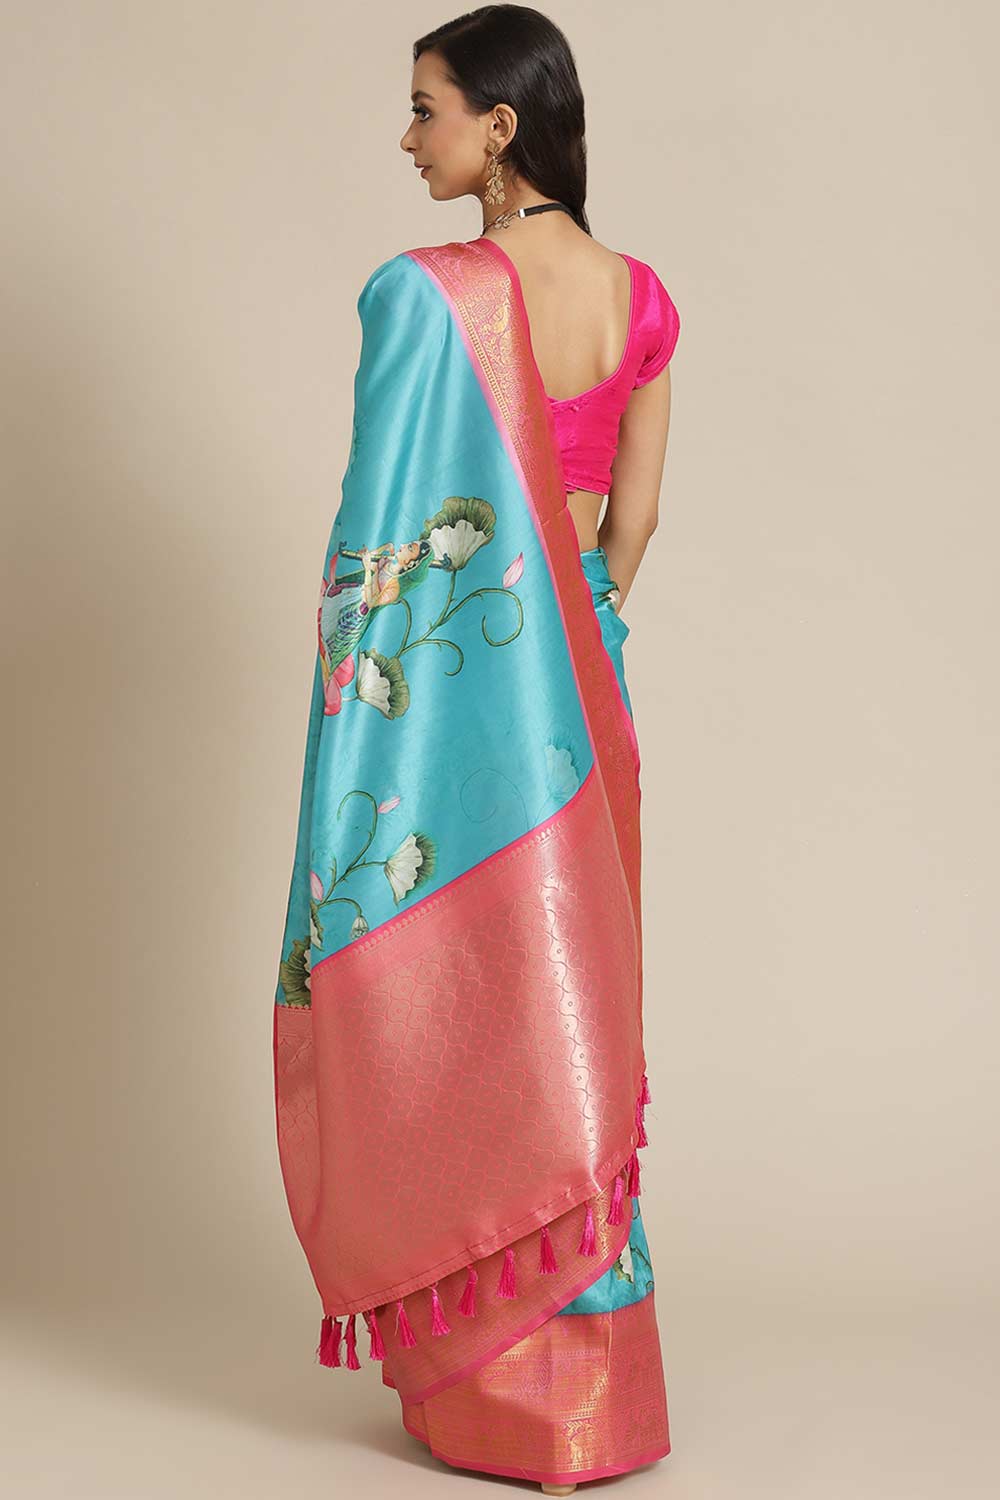 Shop Aisha Teal Soft Art Silk Floral Printed Banarasi One Minute Saree at best offer at our  Store - One Minute Saree